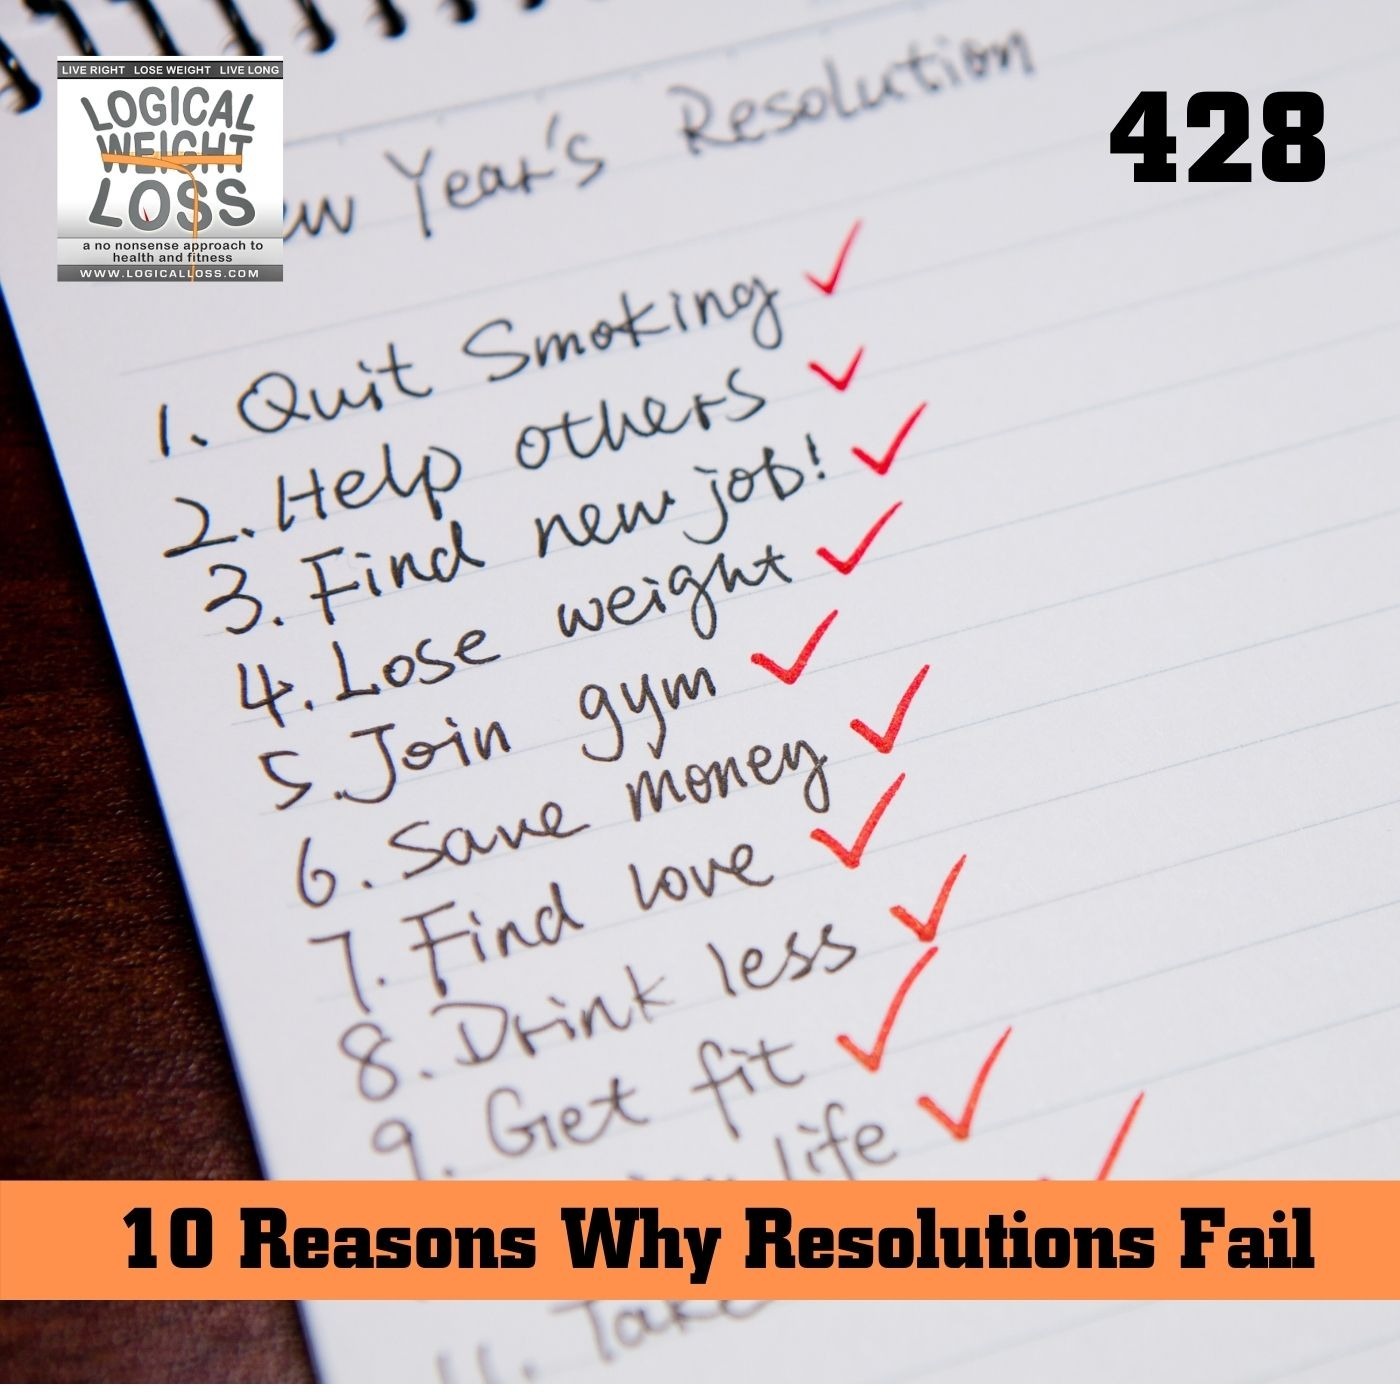 10 Reasons Why Resolution Fail - And How to Create One That Doesn't Image